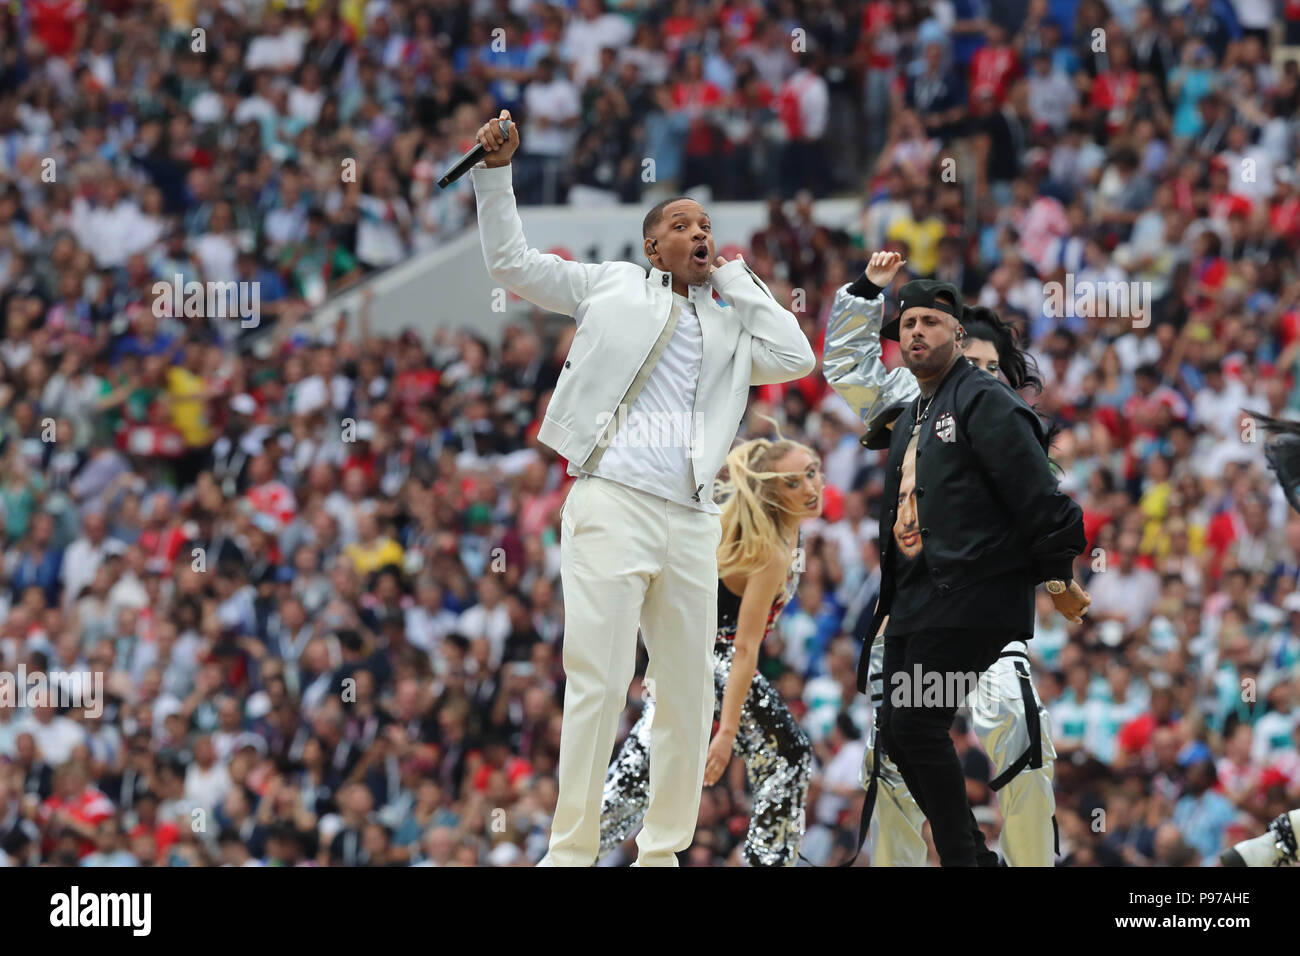 Moscow, Russia. 15th July, 2018. U.S. actor Will Smith (L front) performs  at the closing ceremony